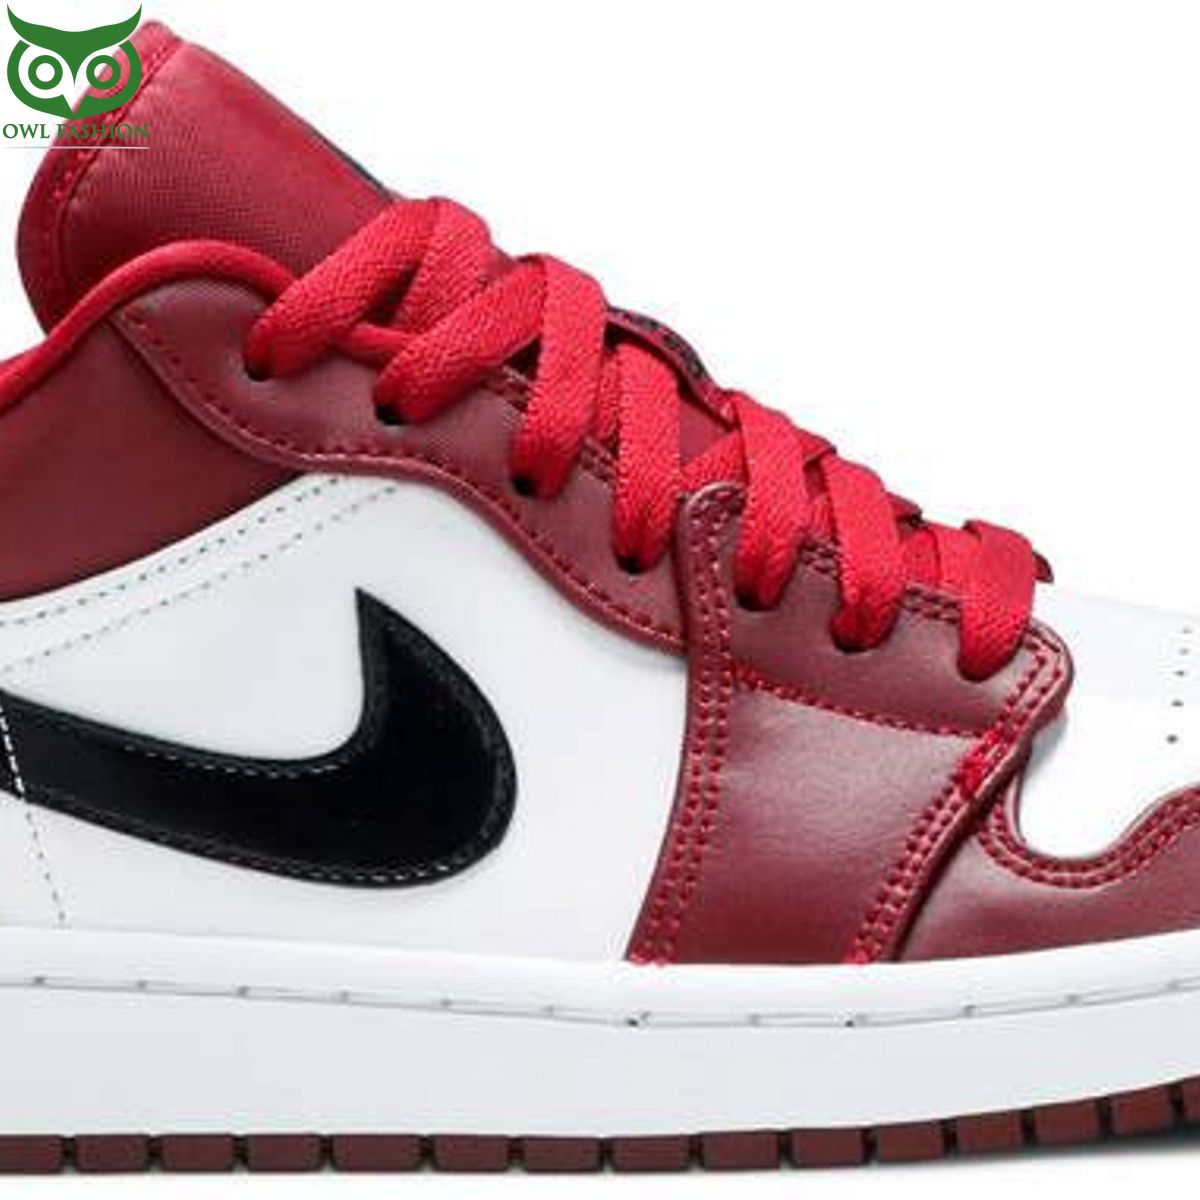 Air Jordan 1 Low Noble Red This design is so eye catching.